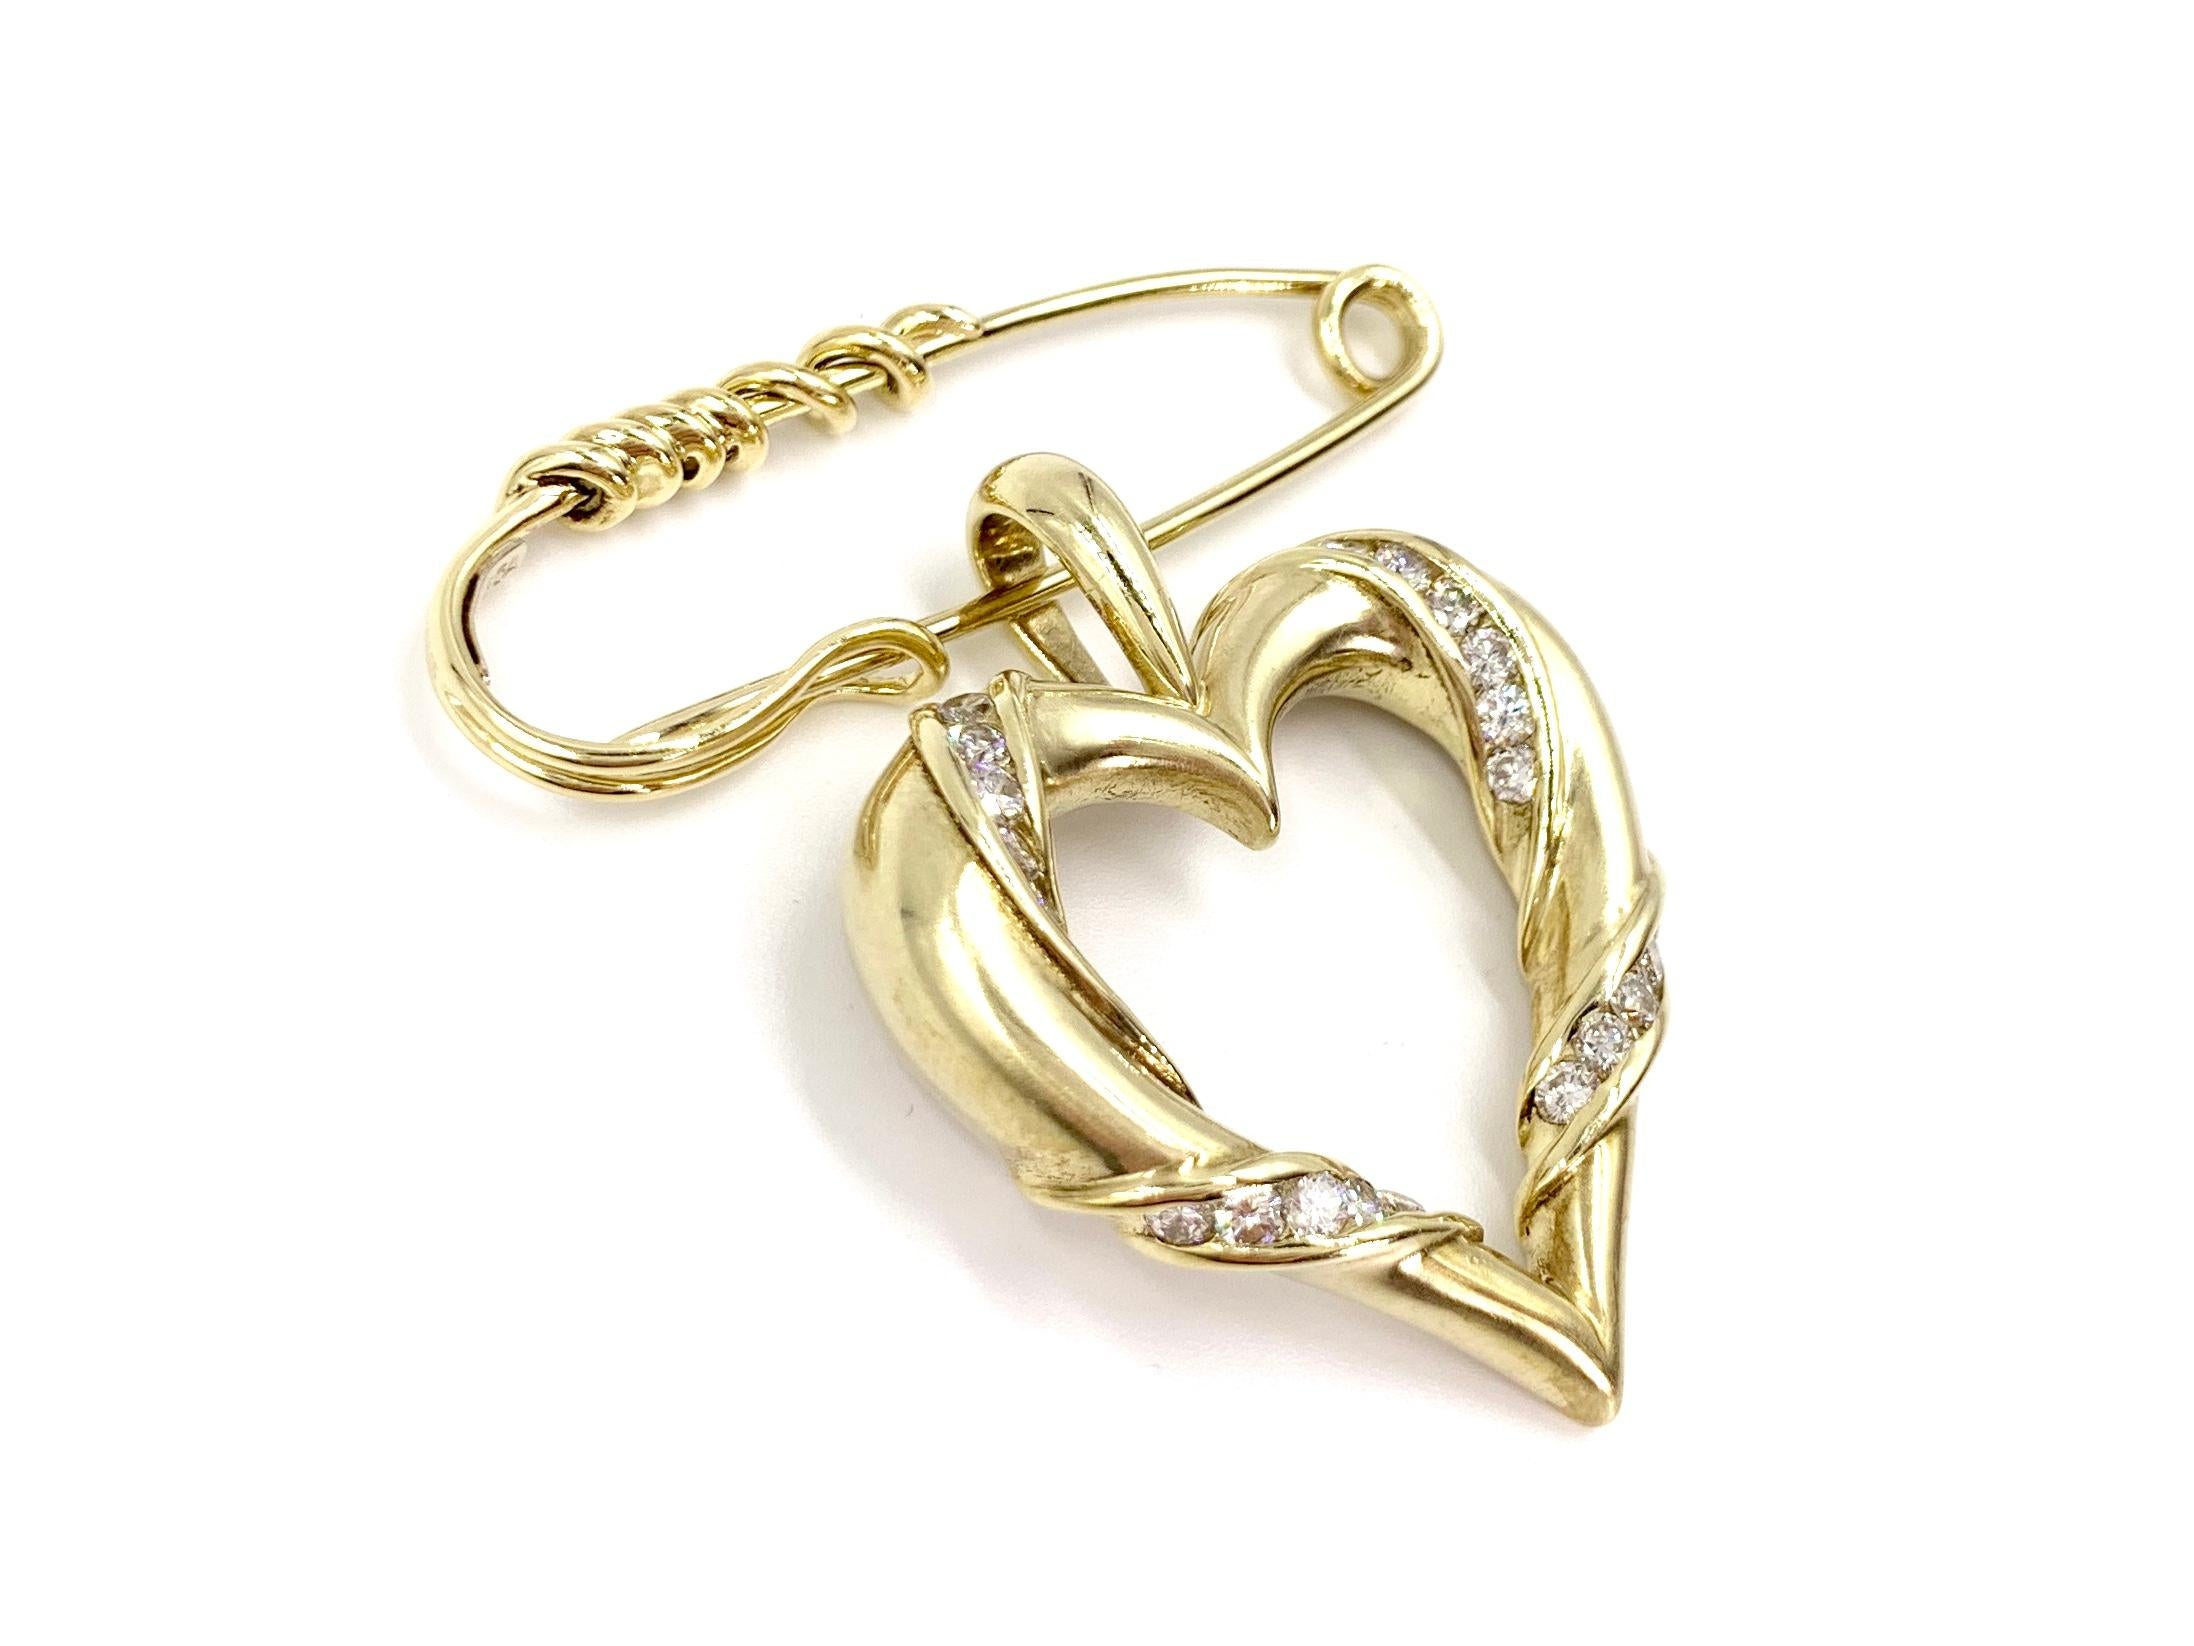 Made with superior quality by expert jeweler, Jose Hess. This satin finished 14 karat yellow gold open heart dangles beautifully from a polished yellow gold safety-pin style brooch. High quality channel set round brilliant diamonds have a total